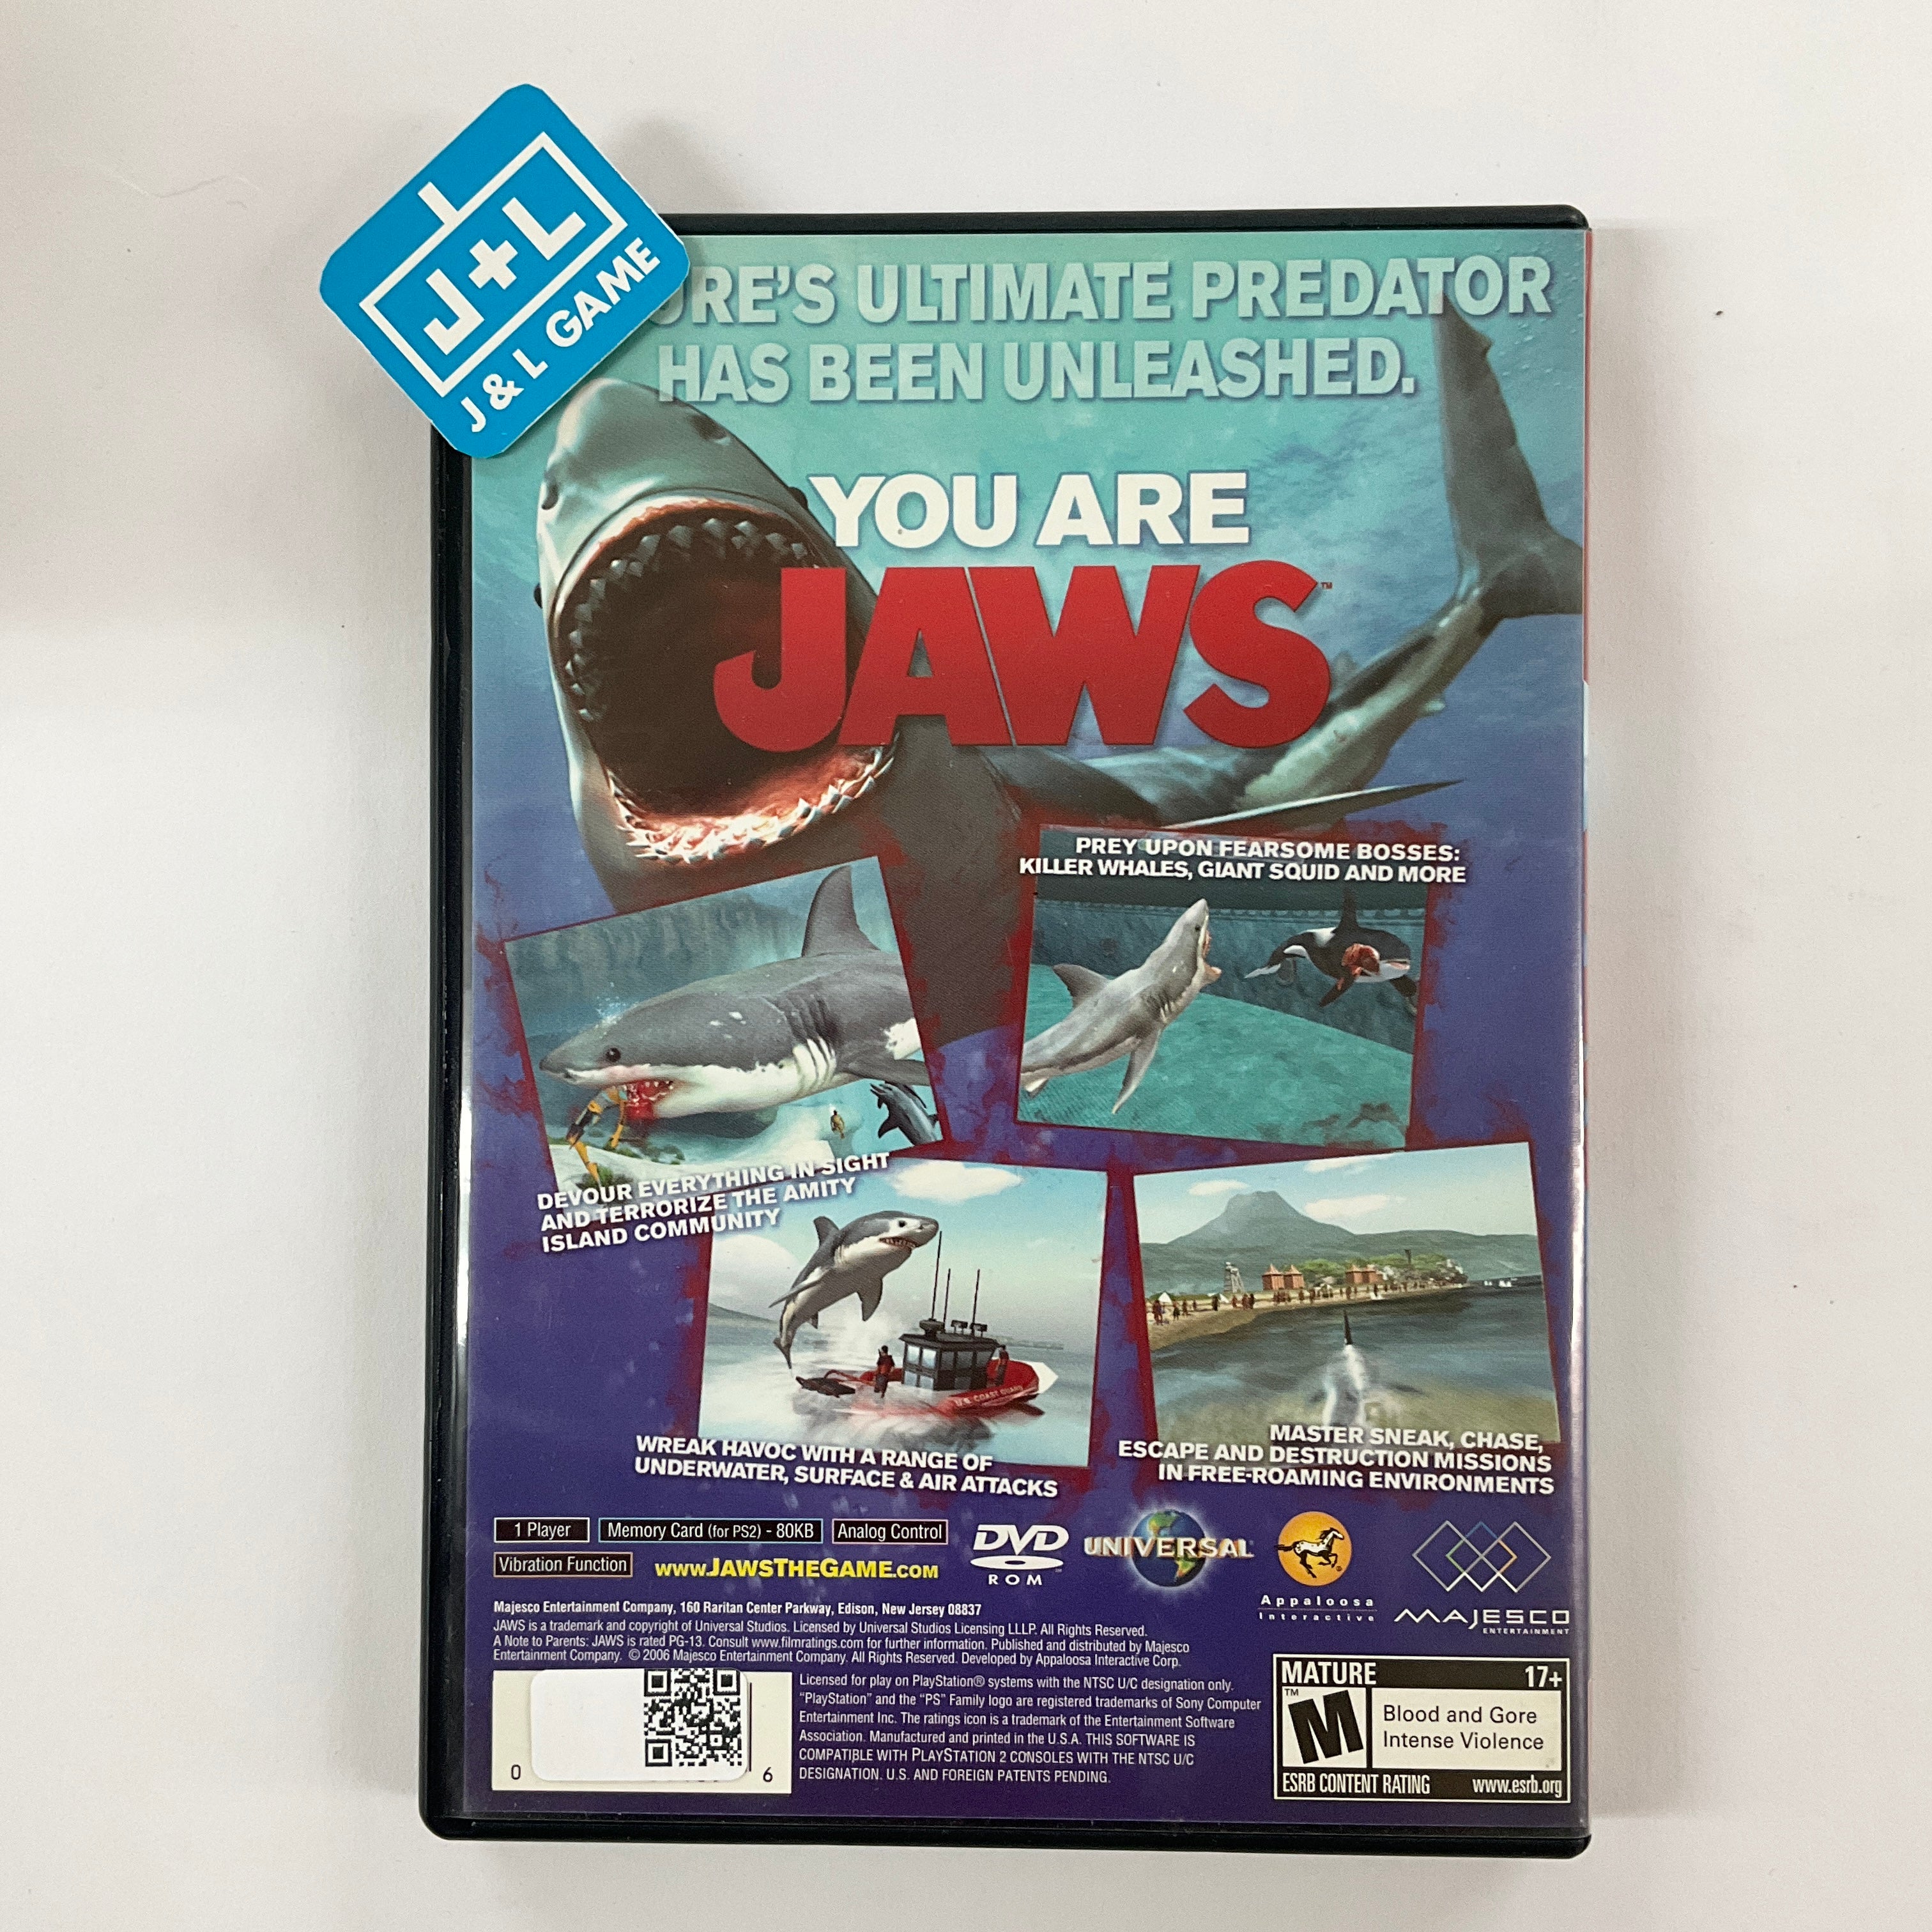 Jaws Unleashed (Greatest Hits) - (PS2) PlayStation 2 [Pre-Owned] Video Games Majesco   